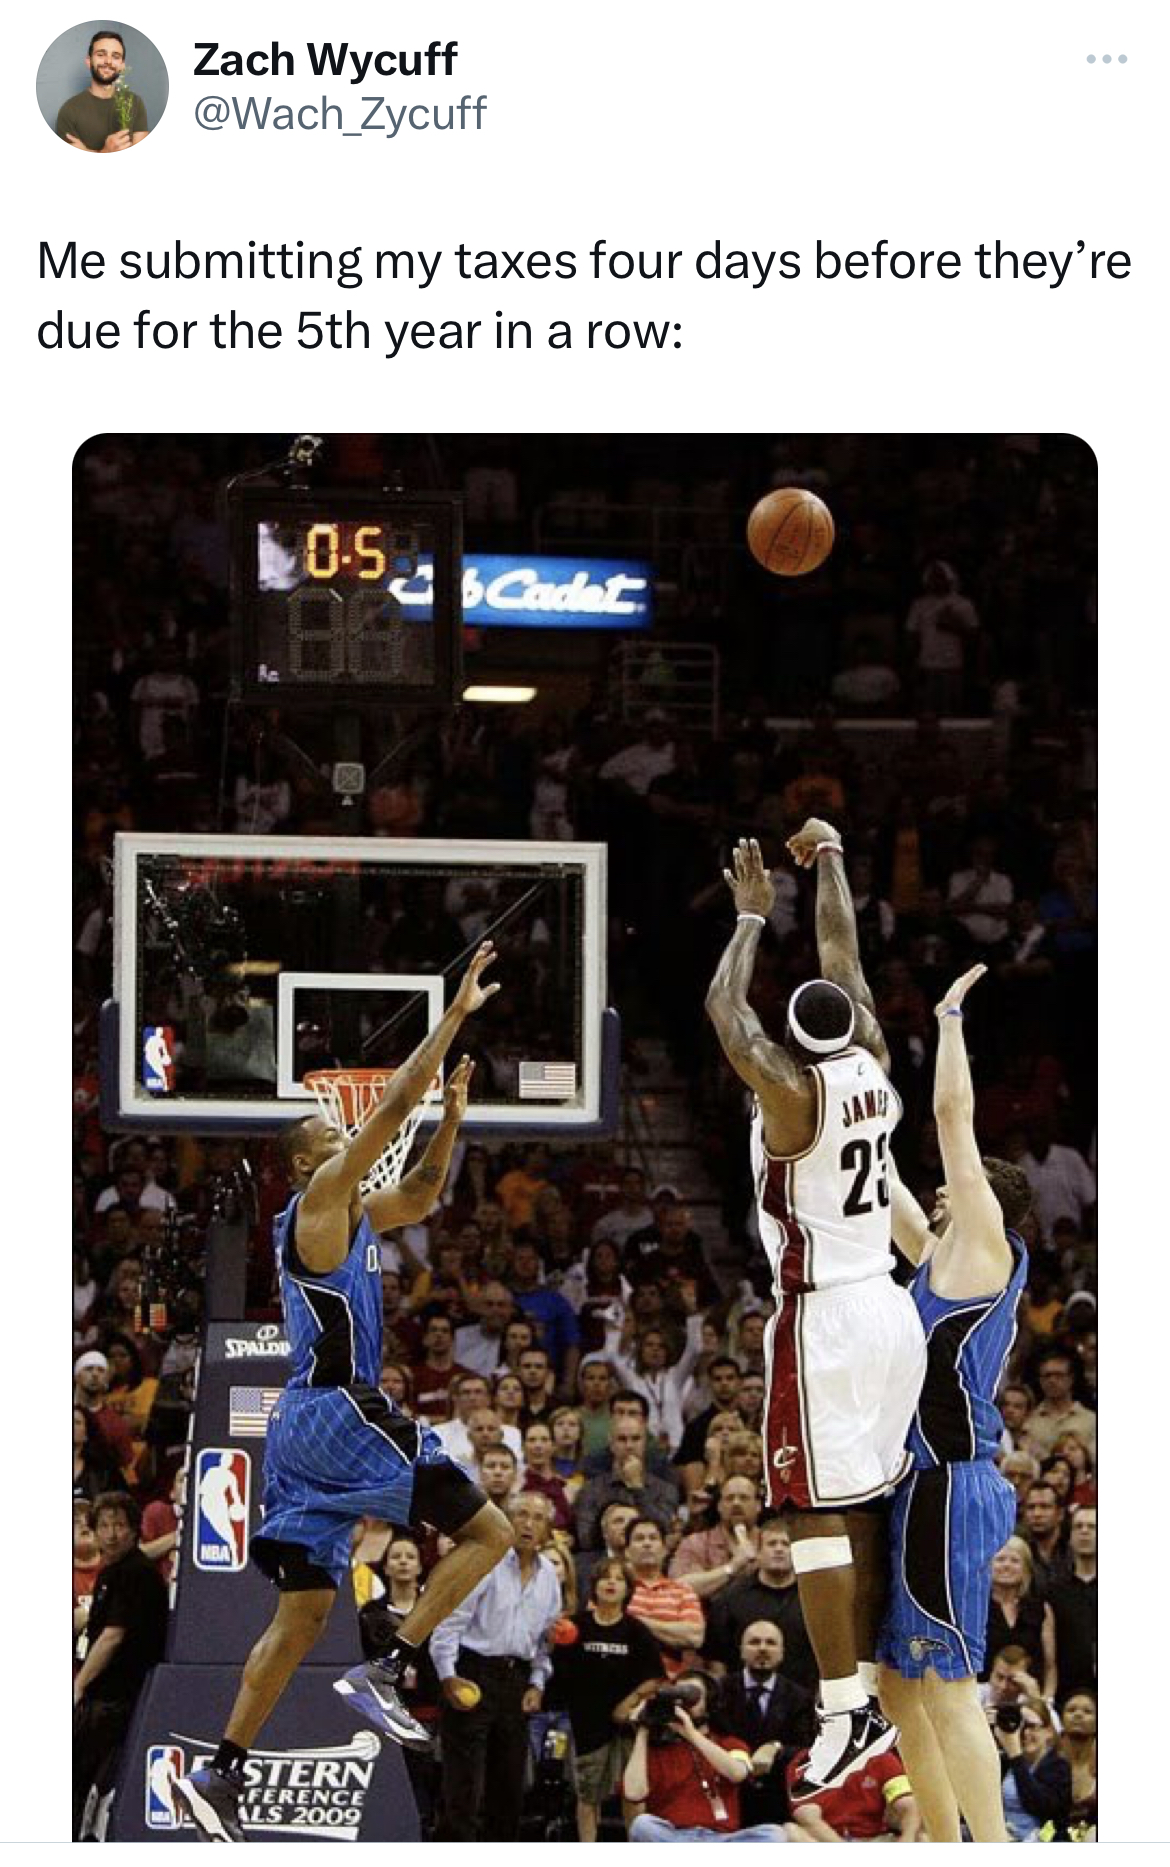 savage tweets - lebron orlando shot - Zach Wycuff Me submitting my taxes four days before they're due for the 5th year in a row 105 'Stern Cremeence Uk 2009 Cadet 10 2